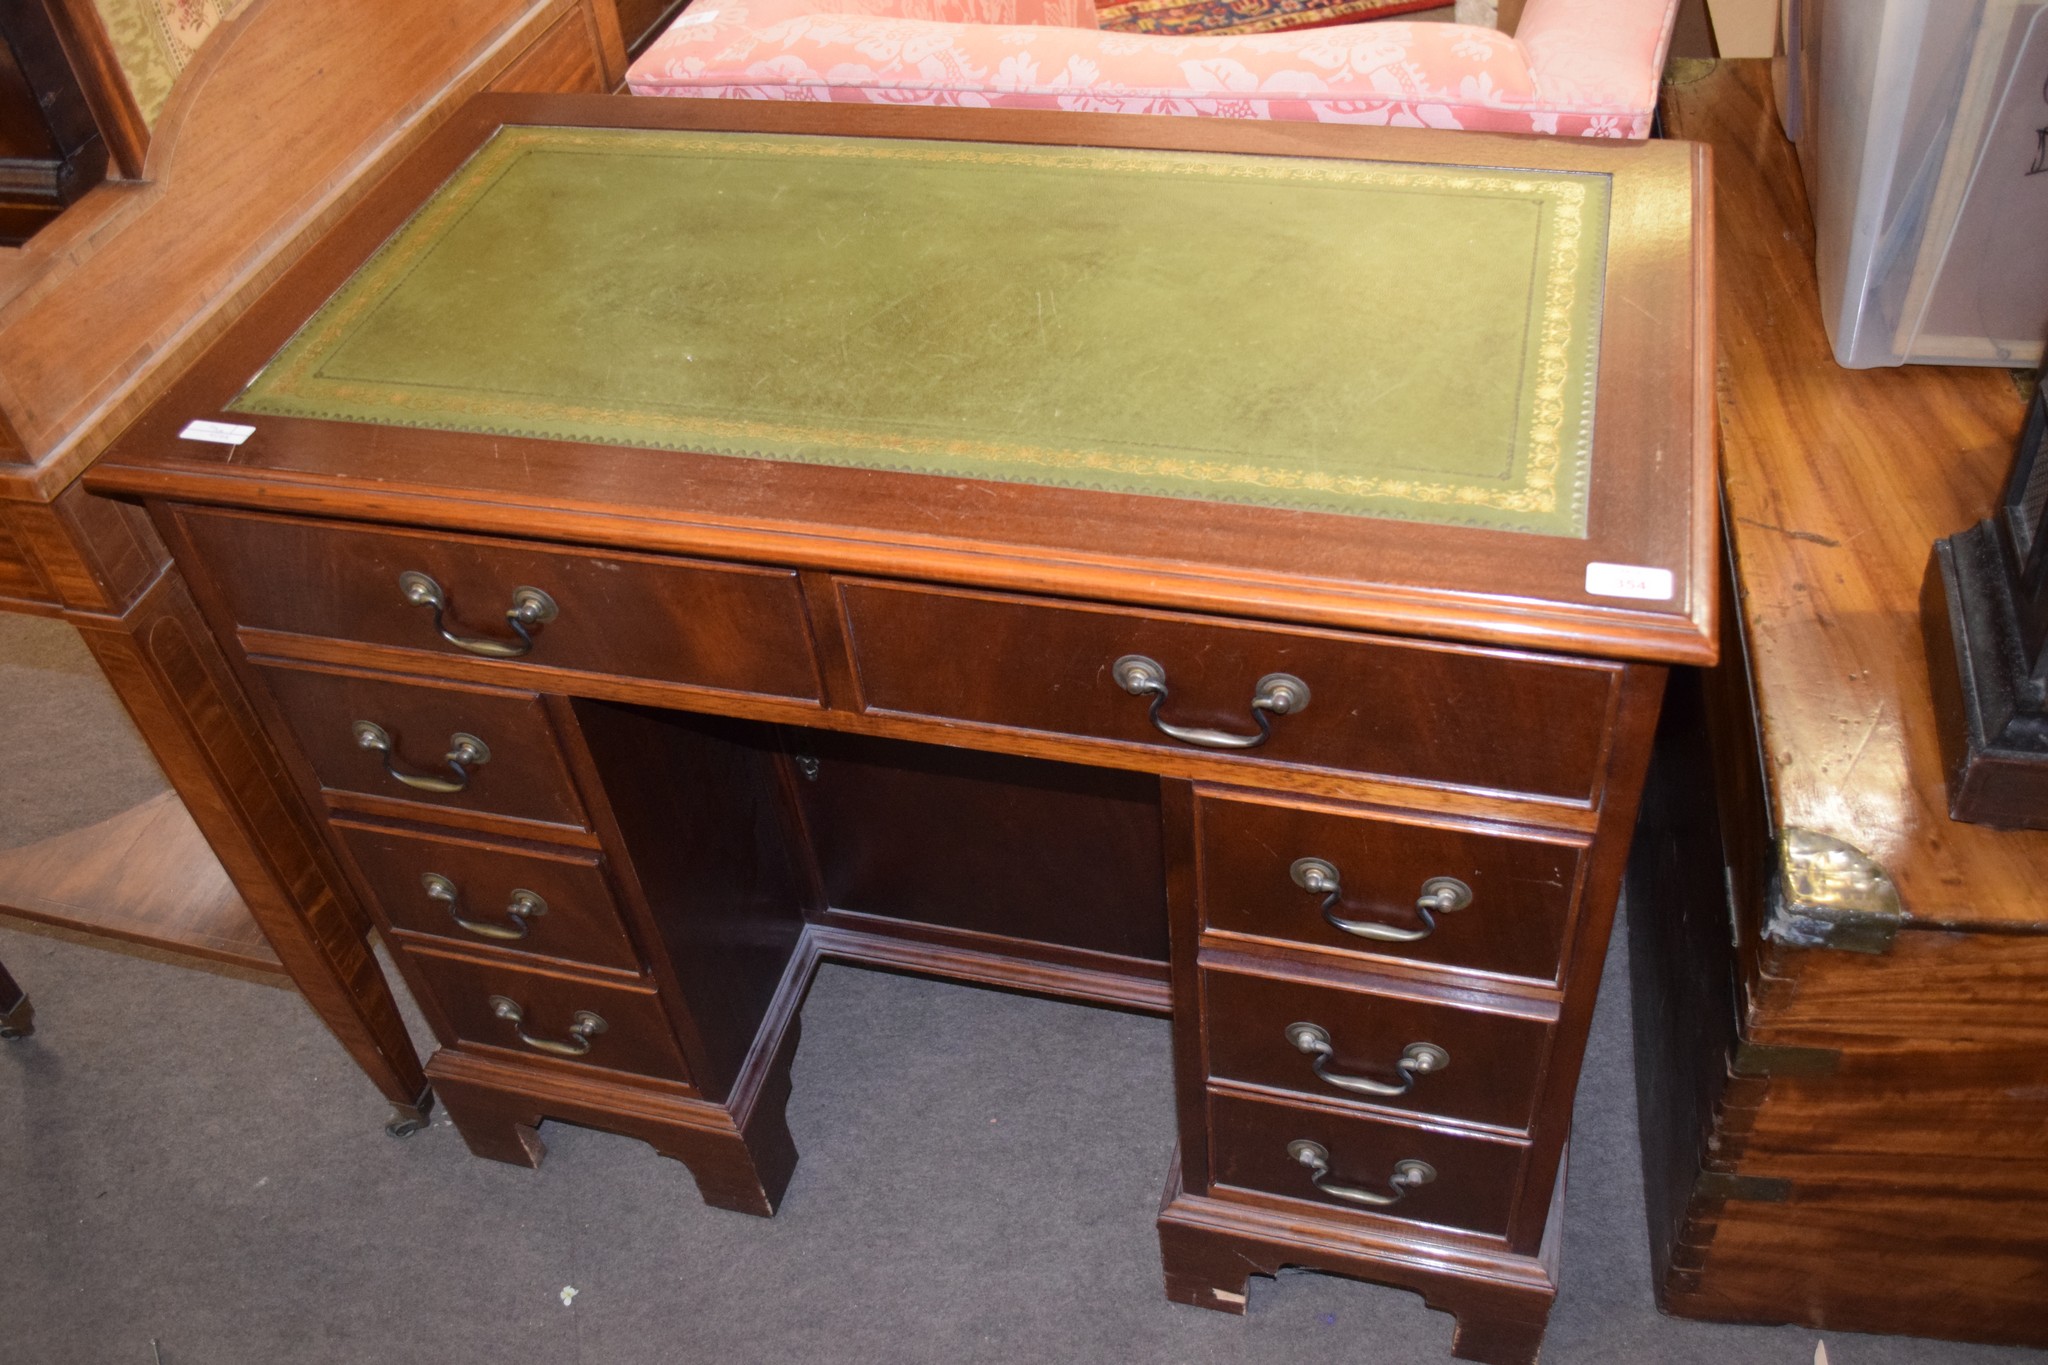 Reproduction small mahogany twin pedestal desk with gilt green tooled leather inset, two frieze